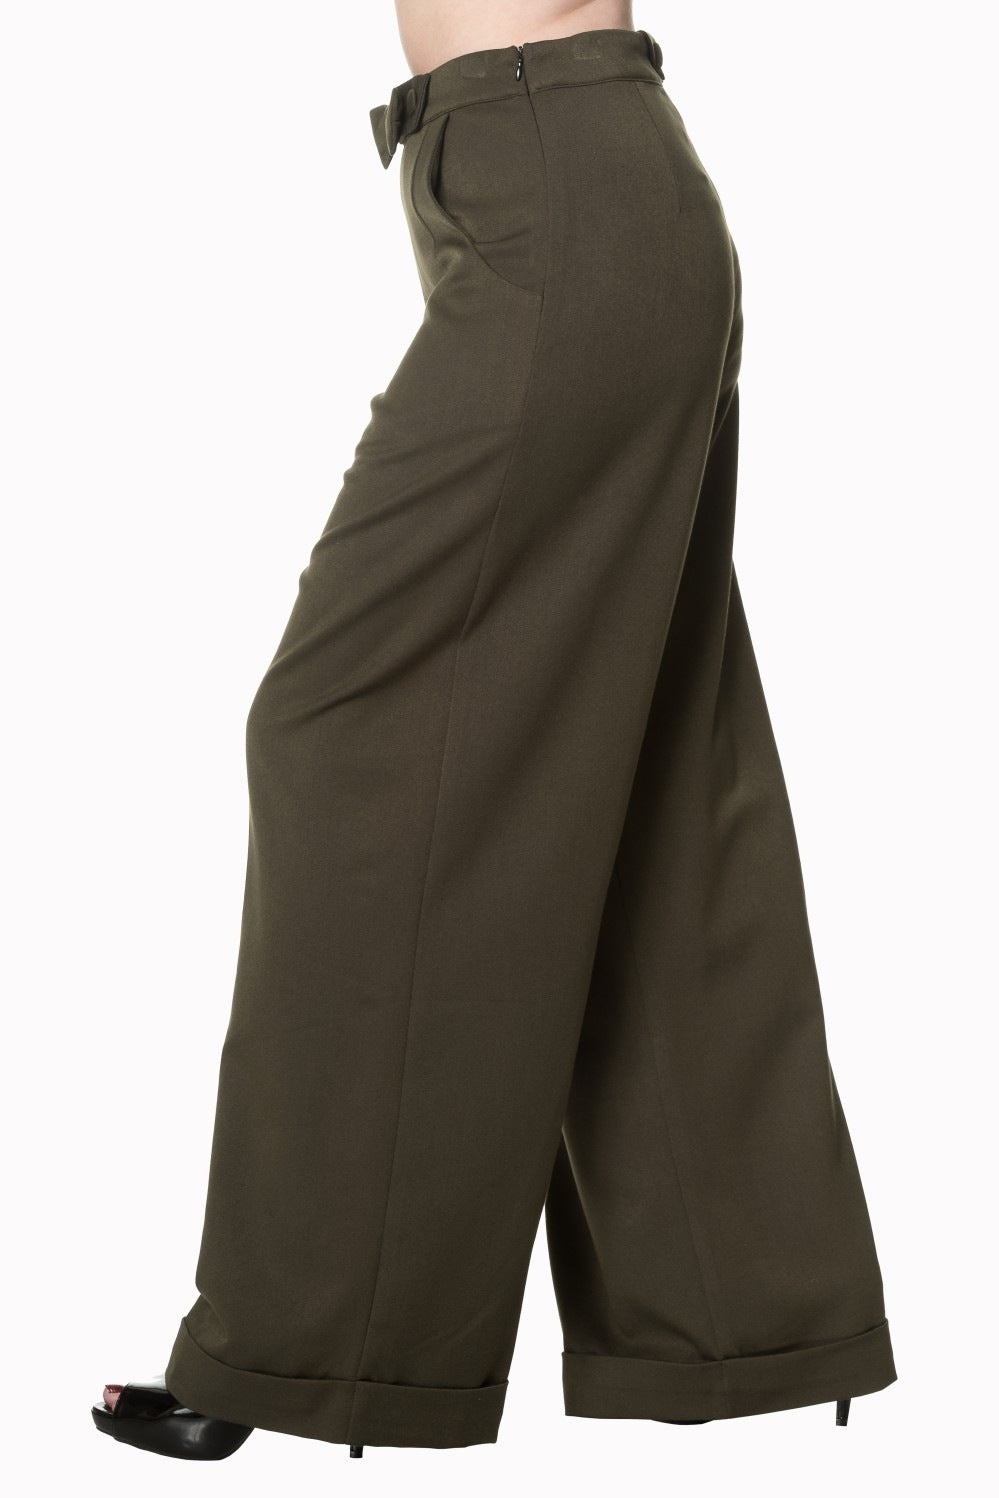 Hidden Away Trousers olive